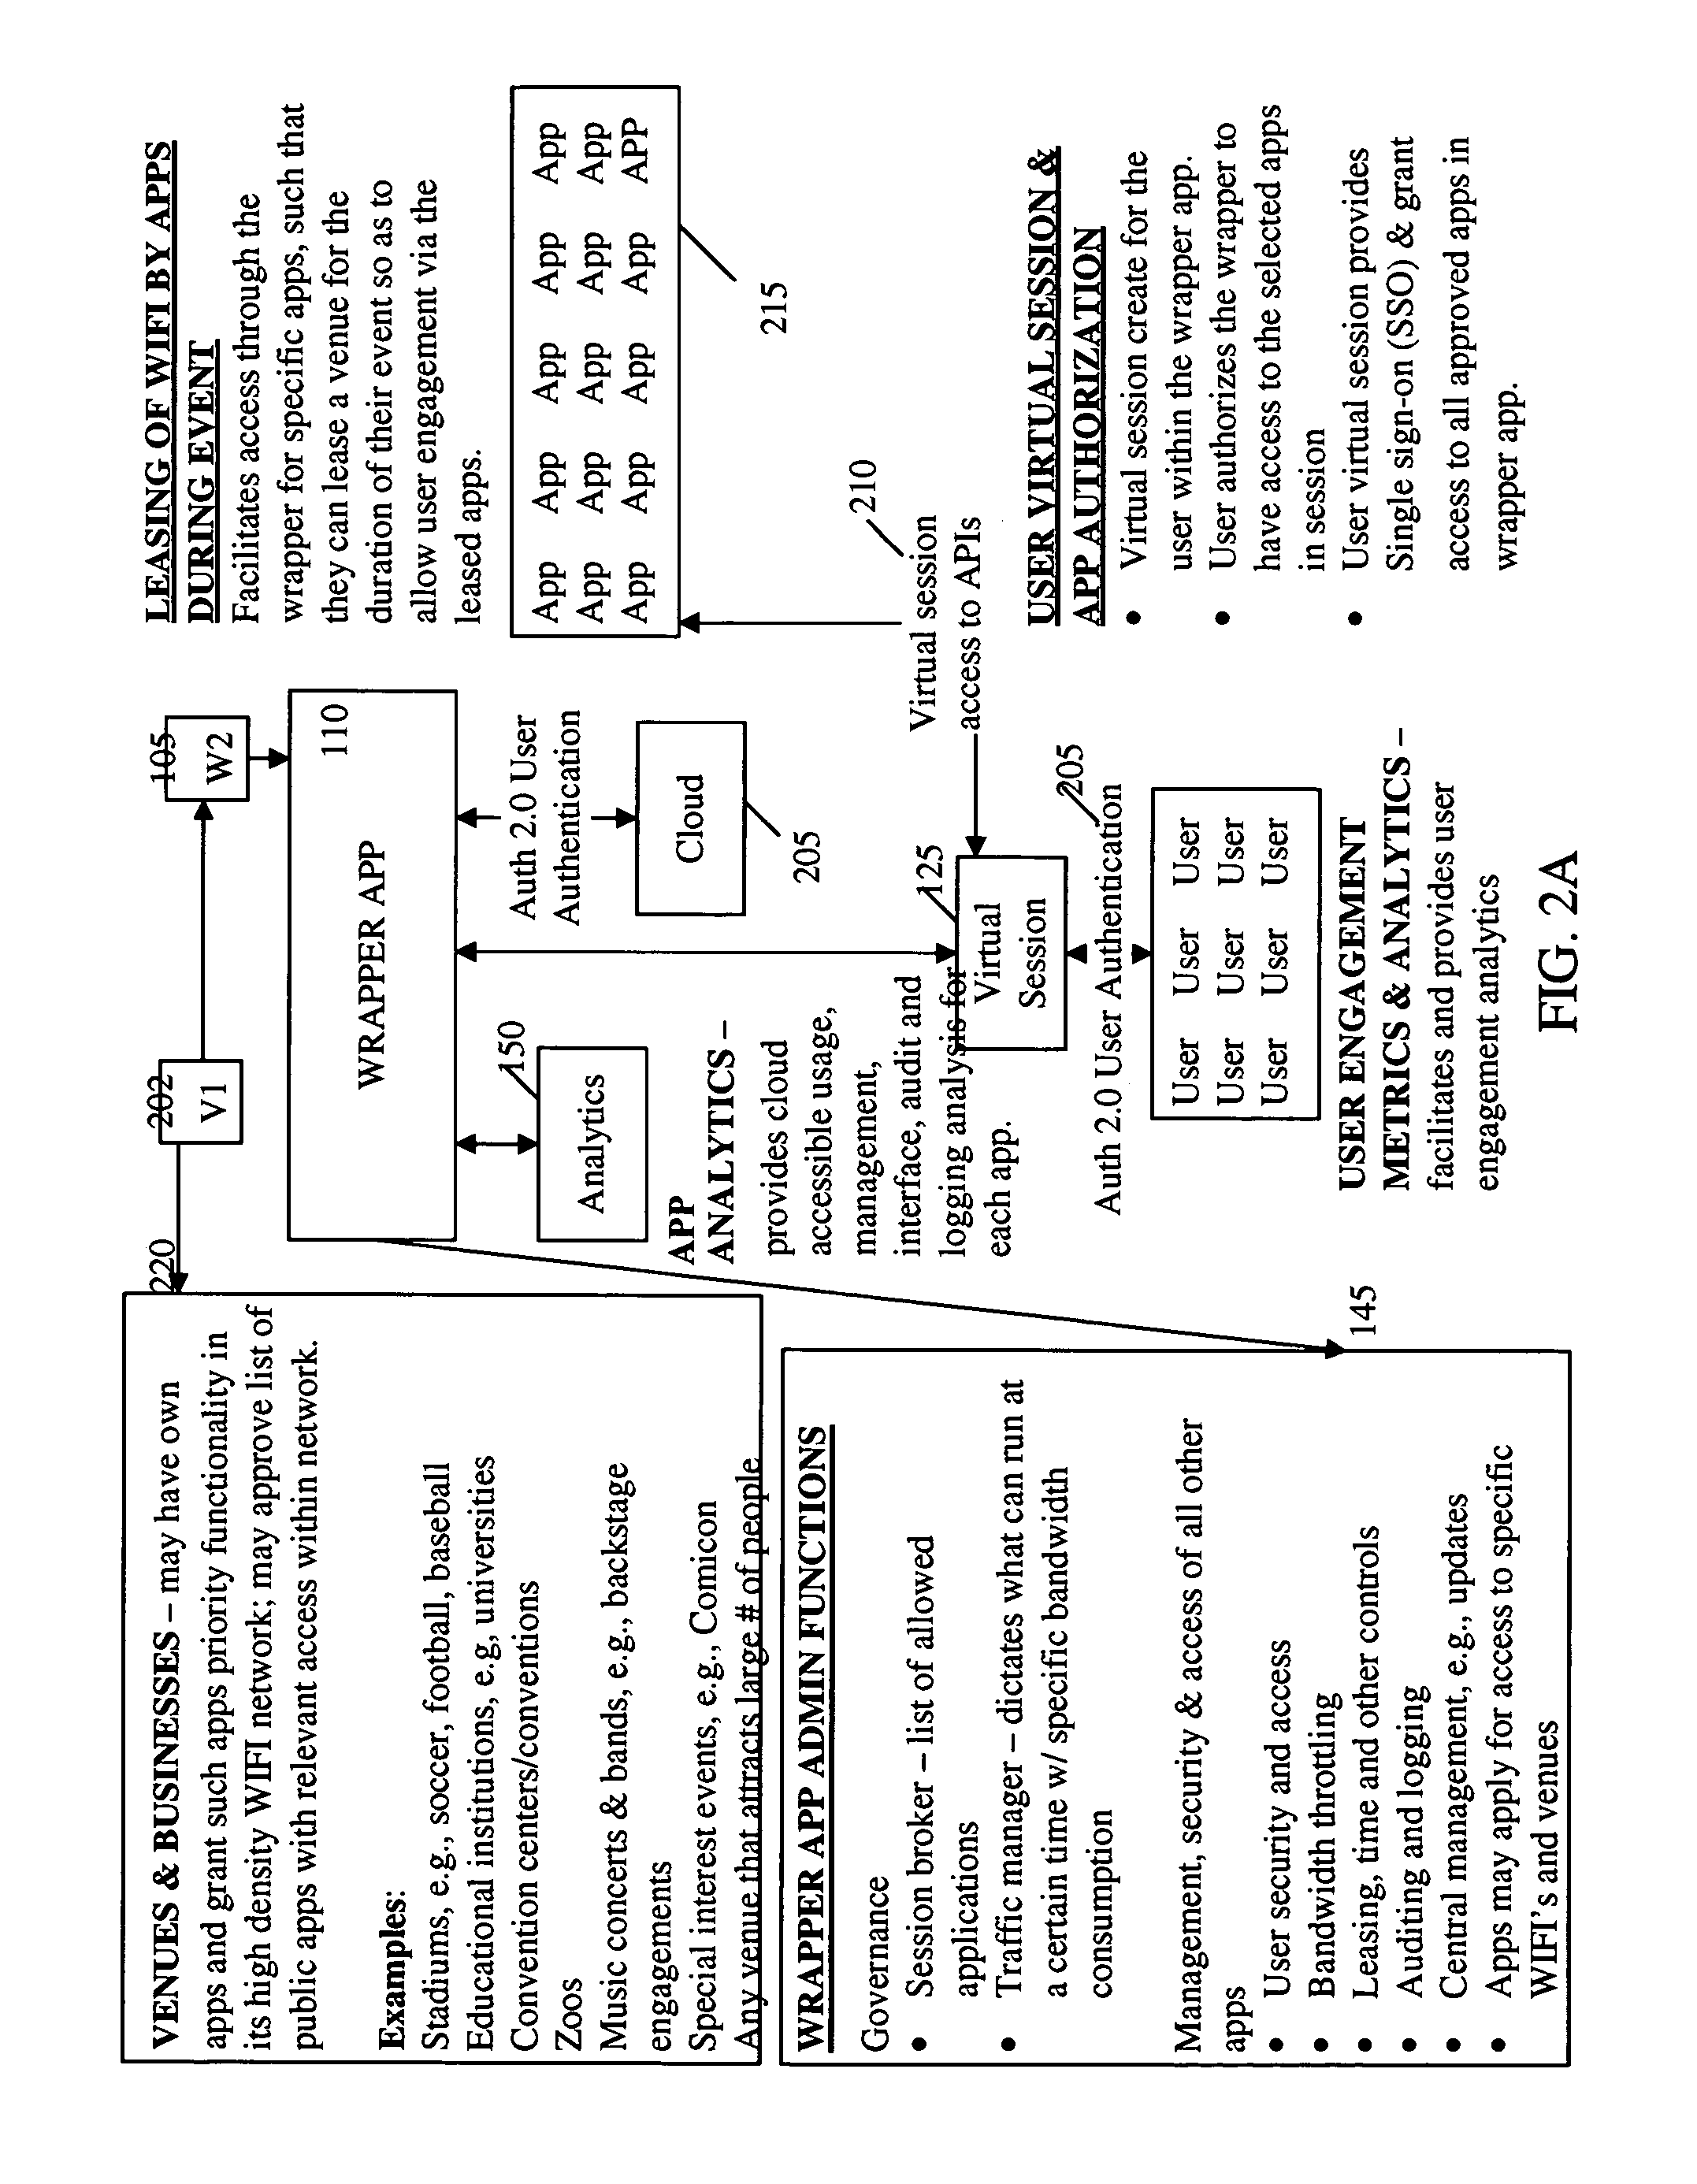 Controlling network access using a wrapper application executing on a mobile device